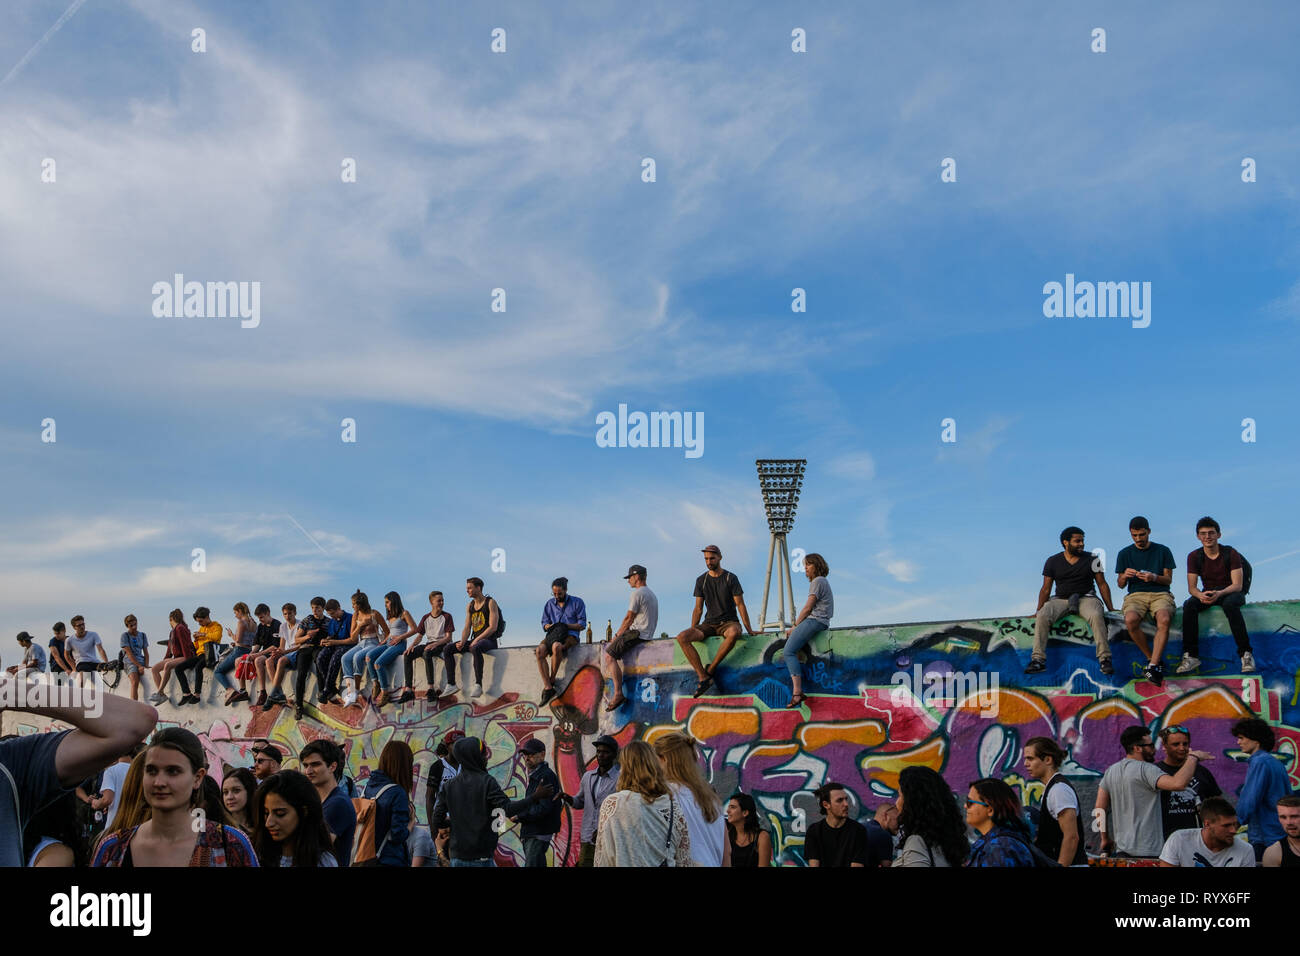 Berlin, Germany, may 2017: Many young people sitting on wall in crowded park (Mauerpark) at 'fete de la musique' in Berlin, Germany. Stock Photo